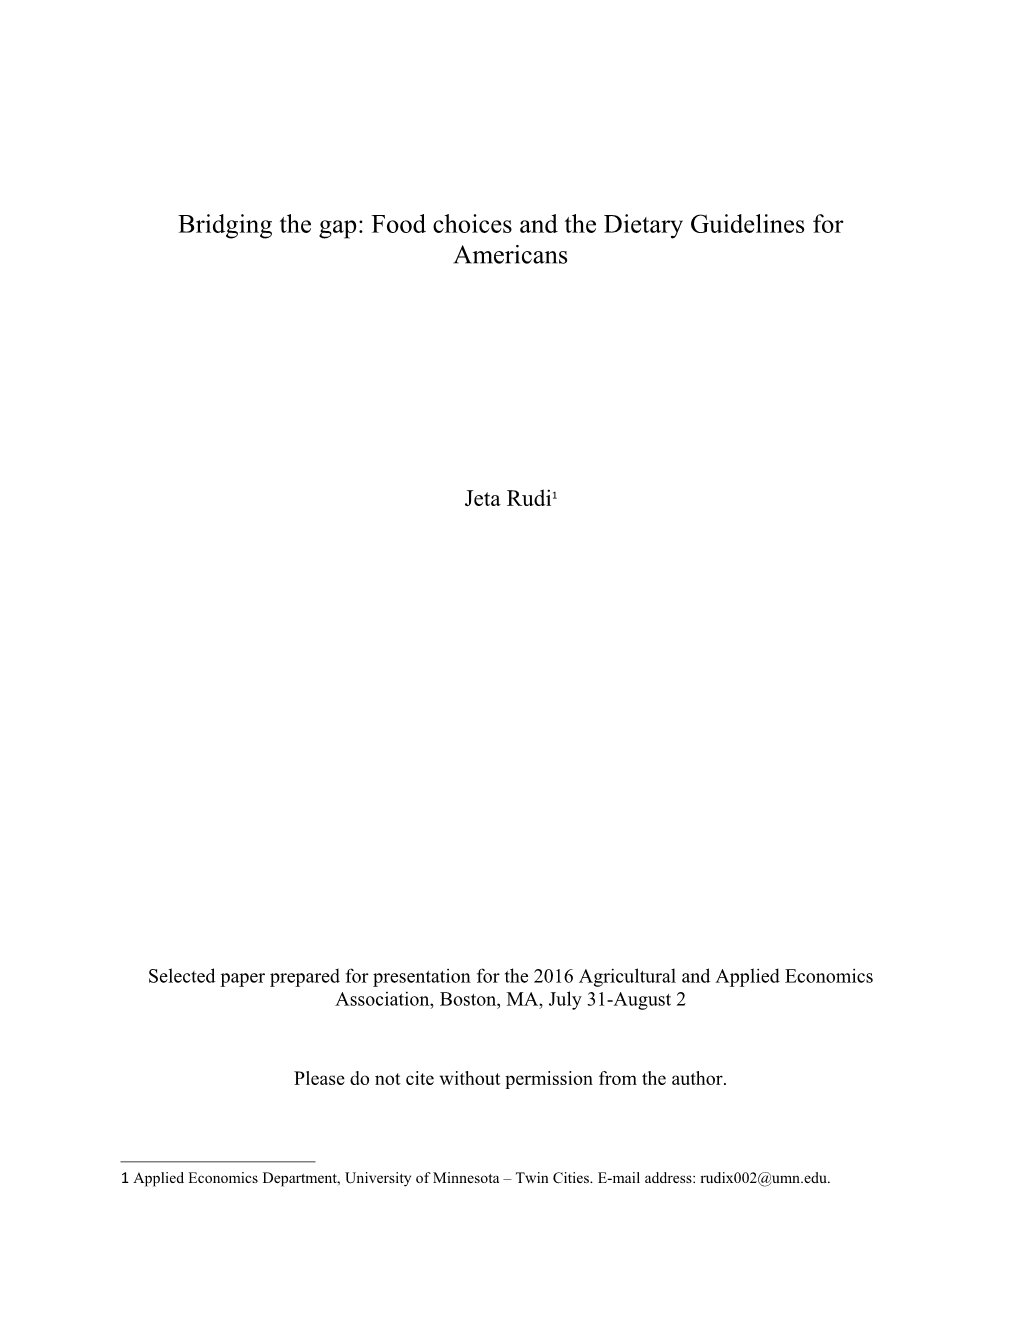 Bridging the Gap: Food Choices and the Dietary Guidelines for Americans